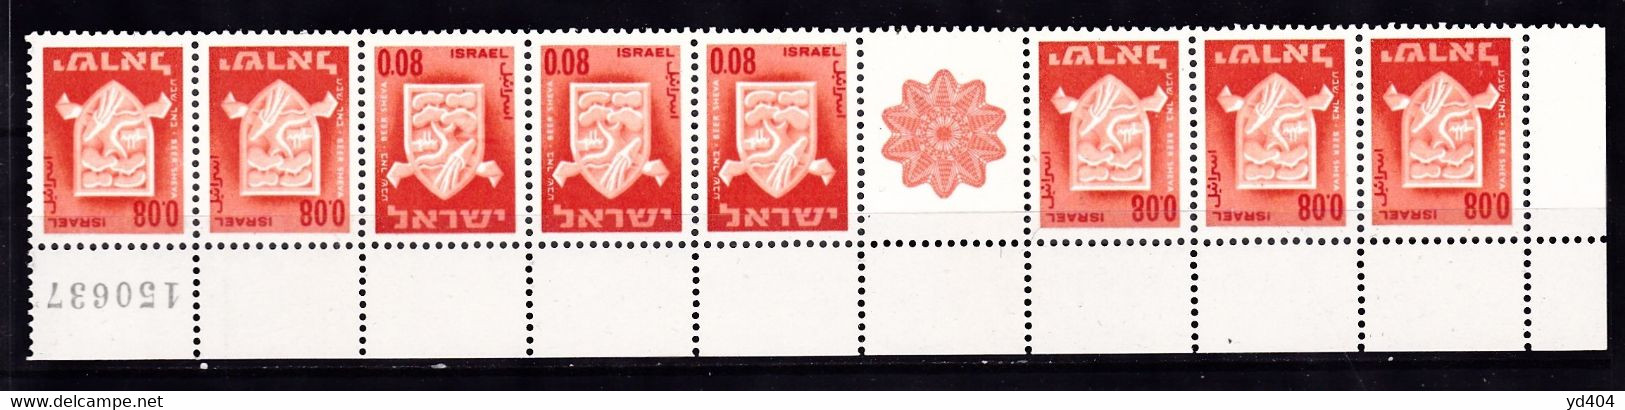 IL57- ISRAEL – 1966 – CURRENT ISSUES FOR BOOKLETS – Y&T # 275a/b MNH - Booklets